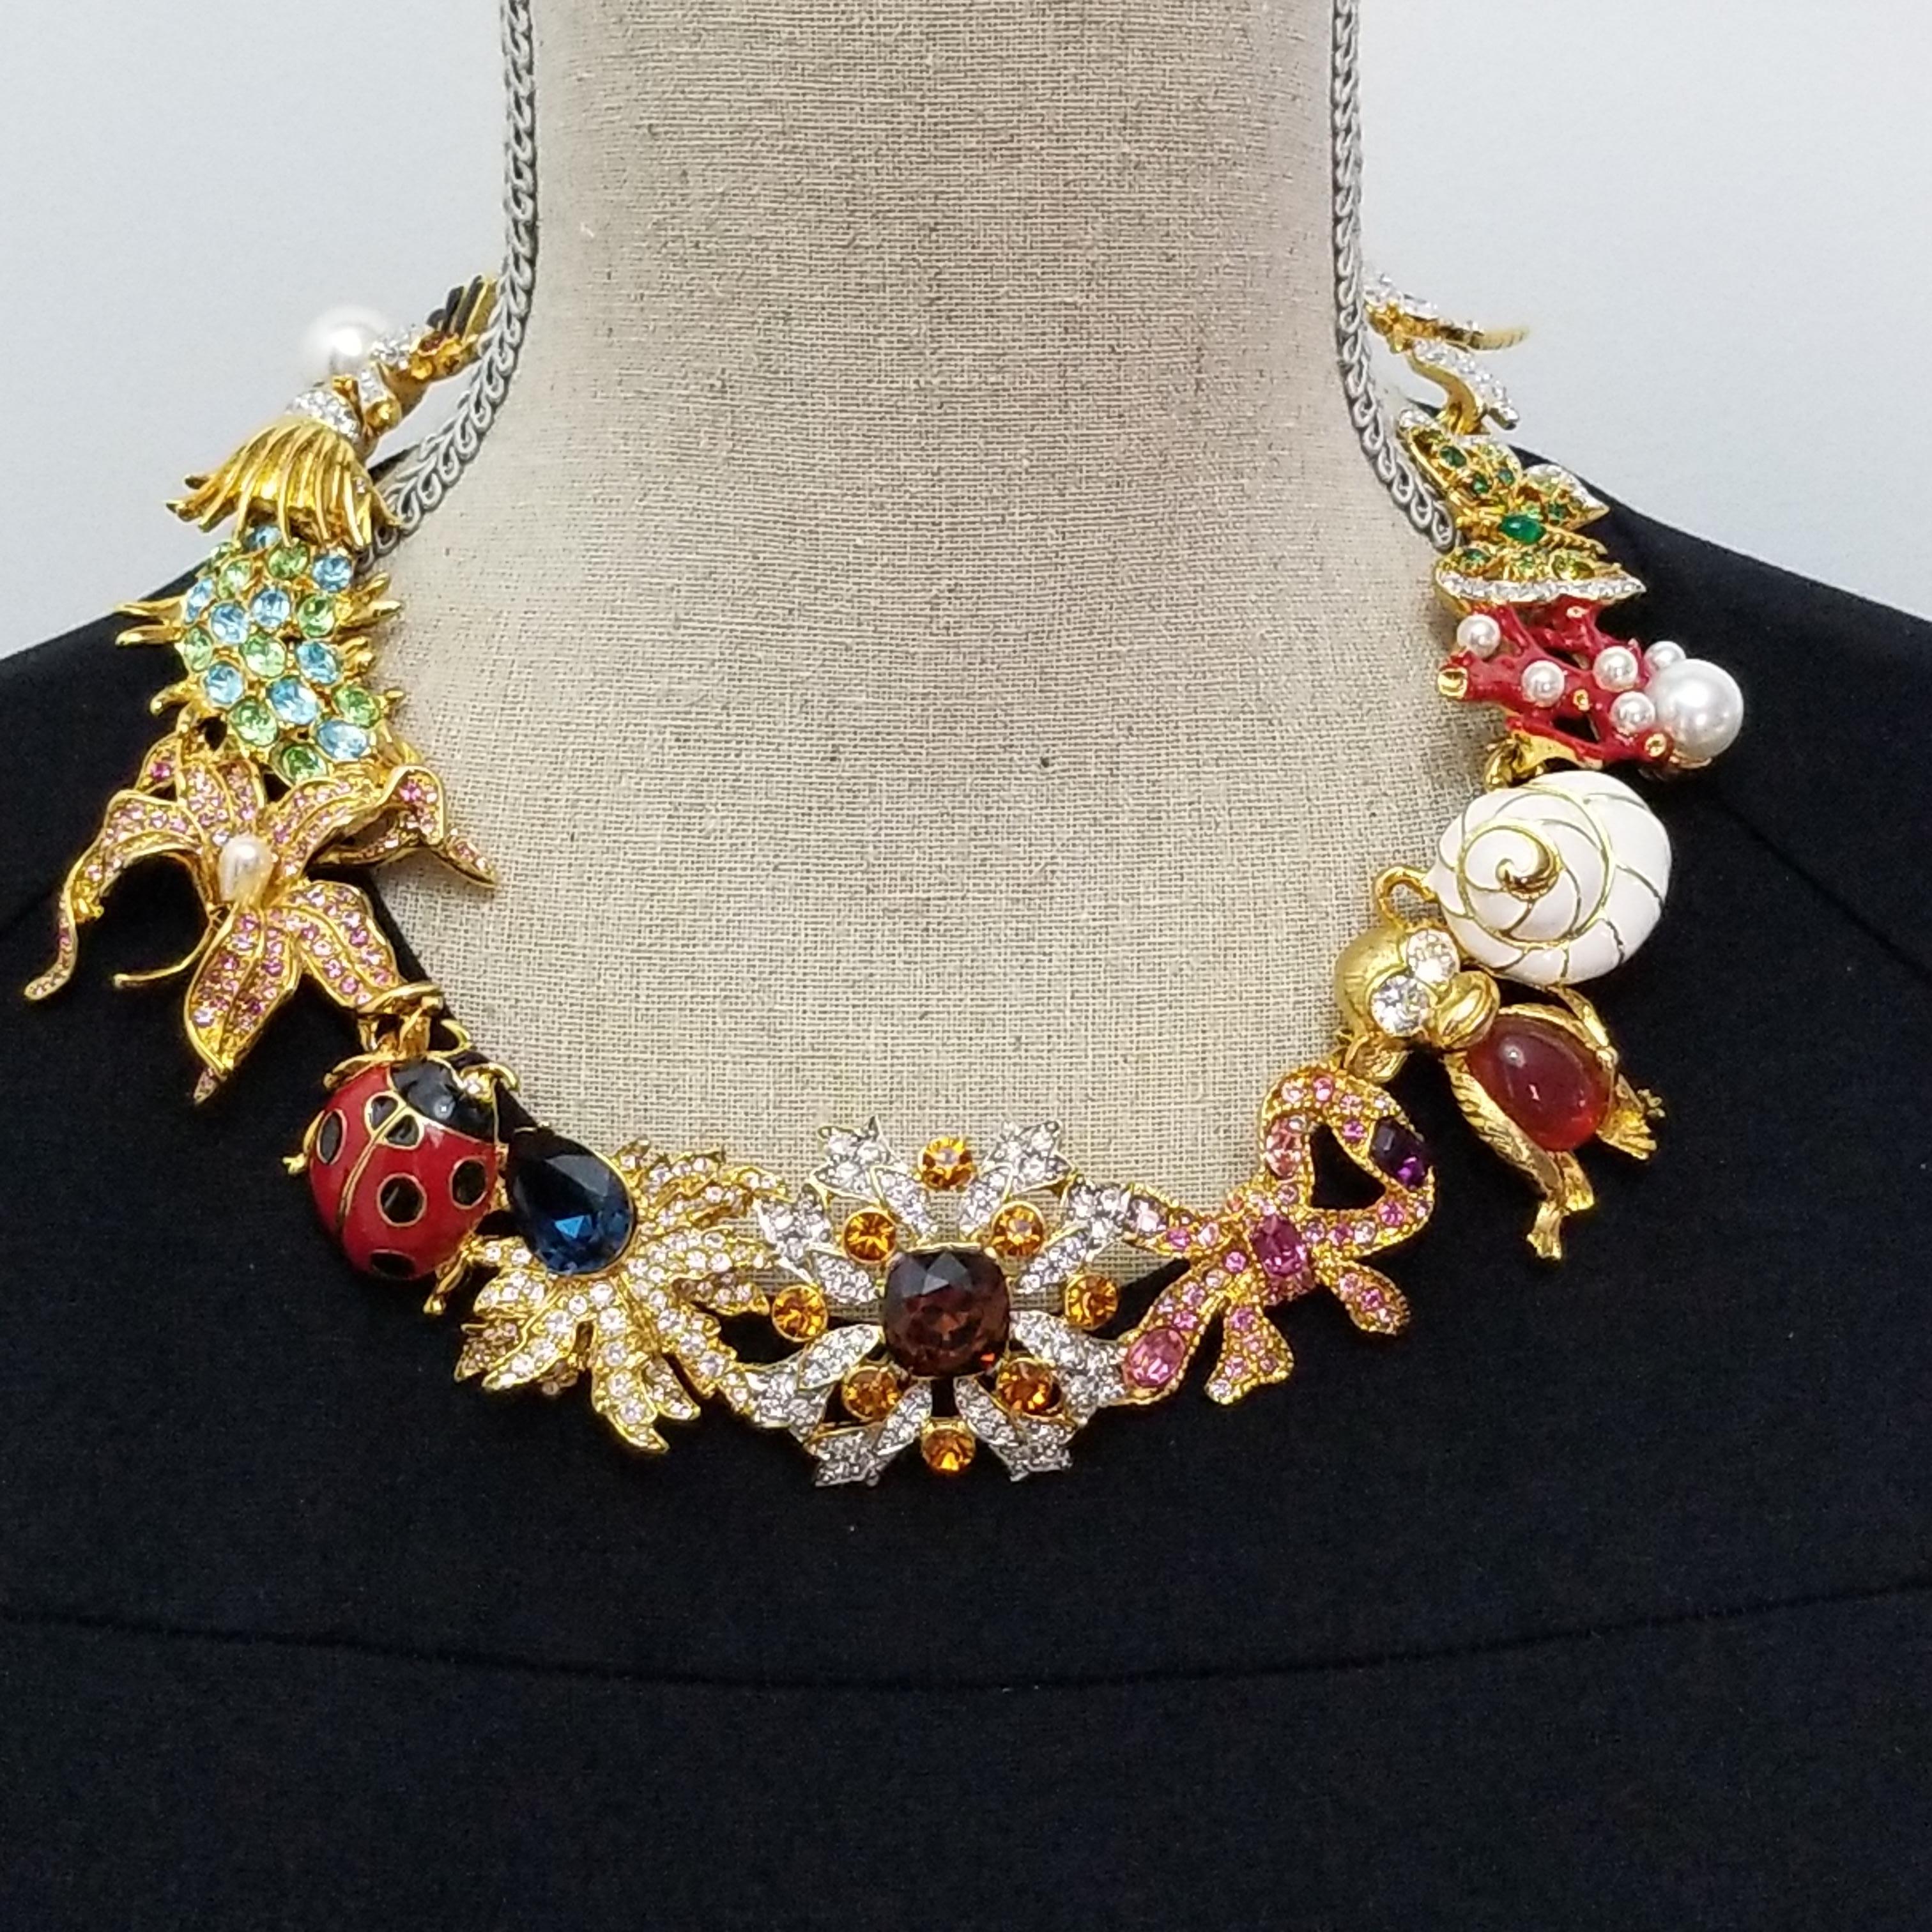 Kaleidoscope necklace by Kenneth Jay Lane. Famous whimsical KJL designs linked together to form a dazzling statement necklace! Colorful dragonfly, butterfly, coral, seashell, monkey, bow, flower, ladybug, and spider motifs. The motifs are linked